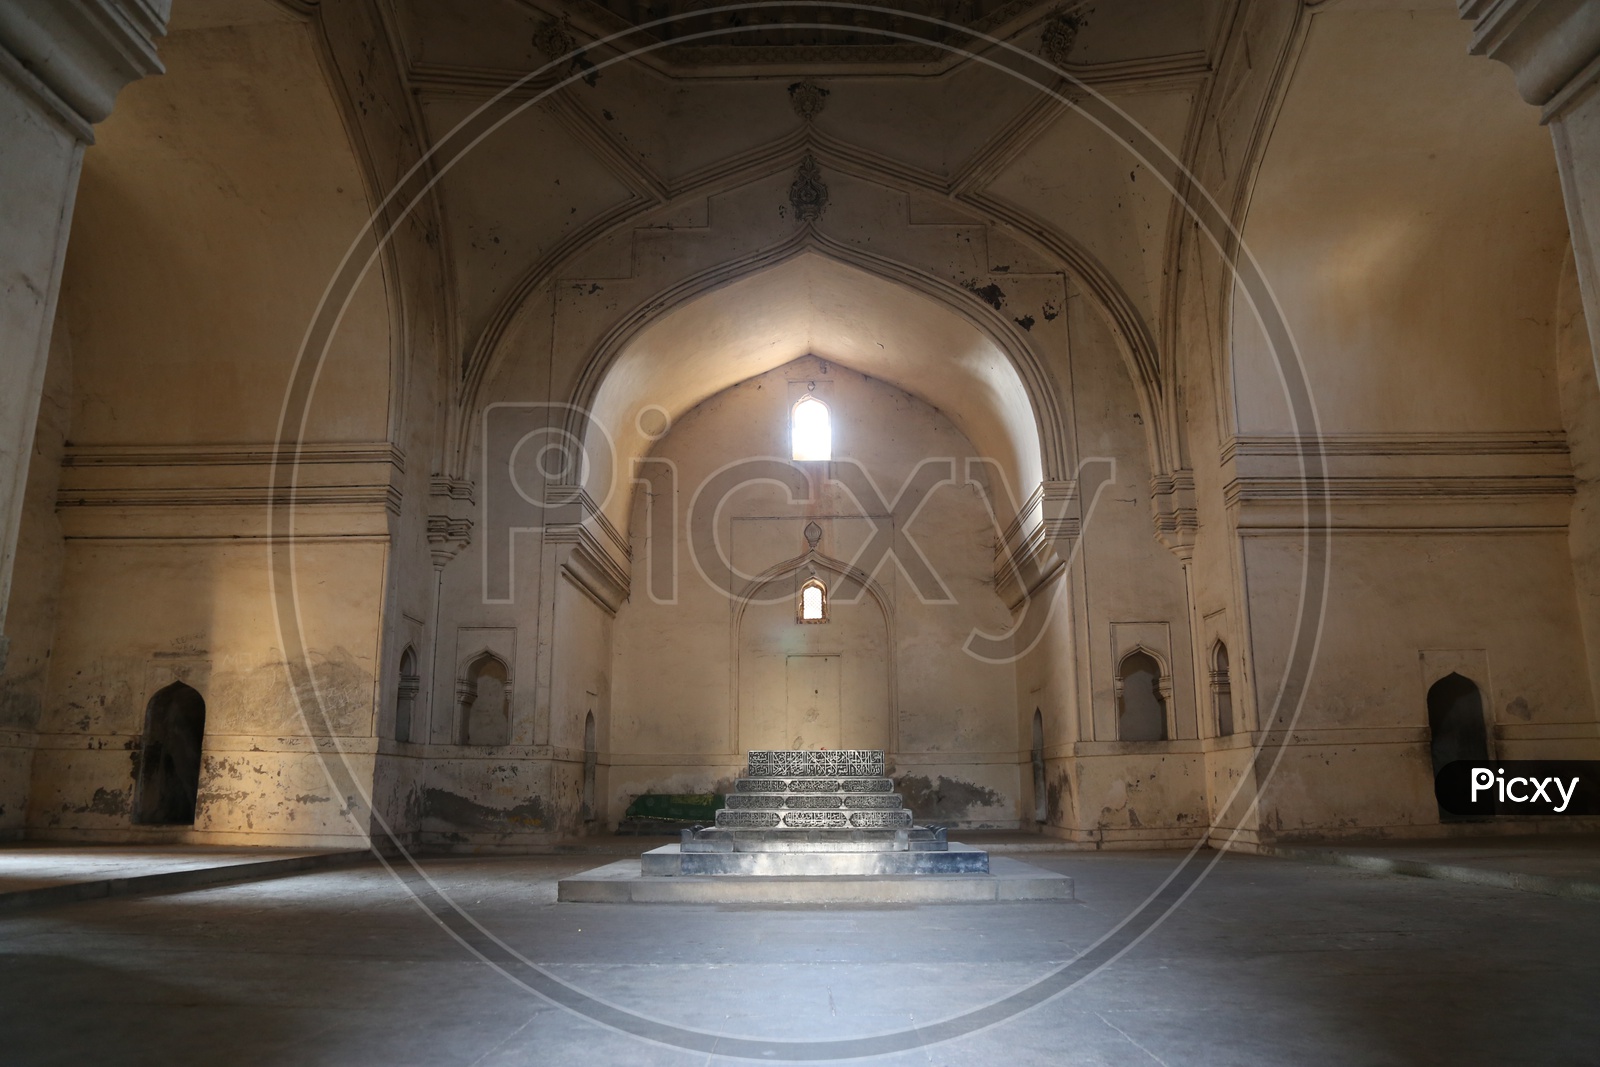 Architecture of Qutub Shahi Tombs With Interior